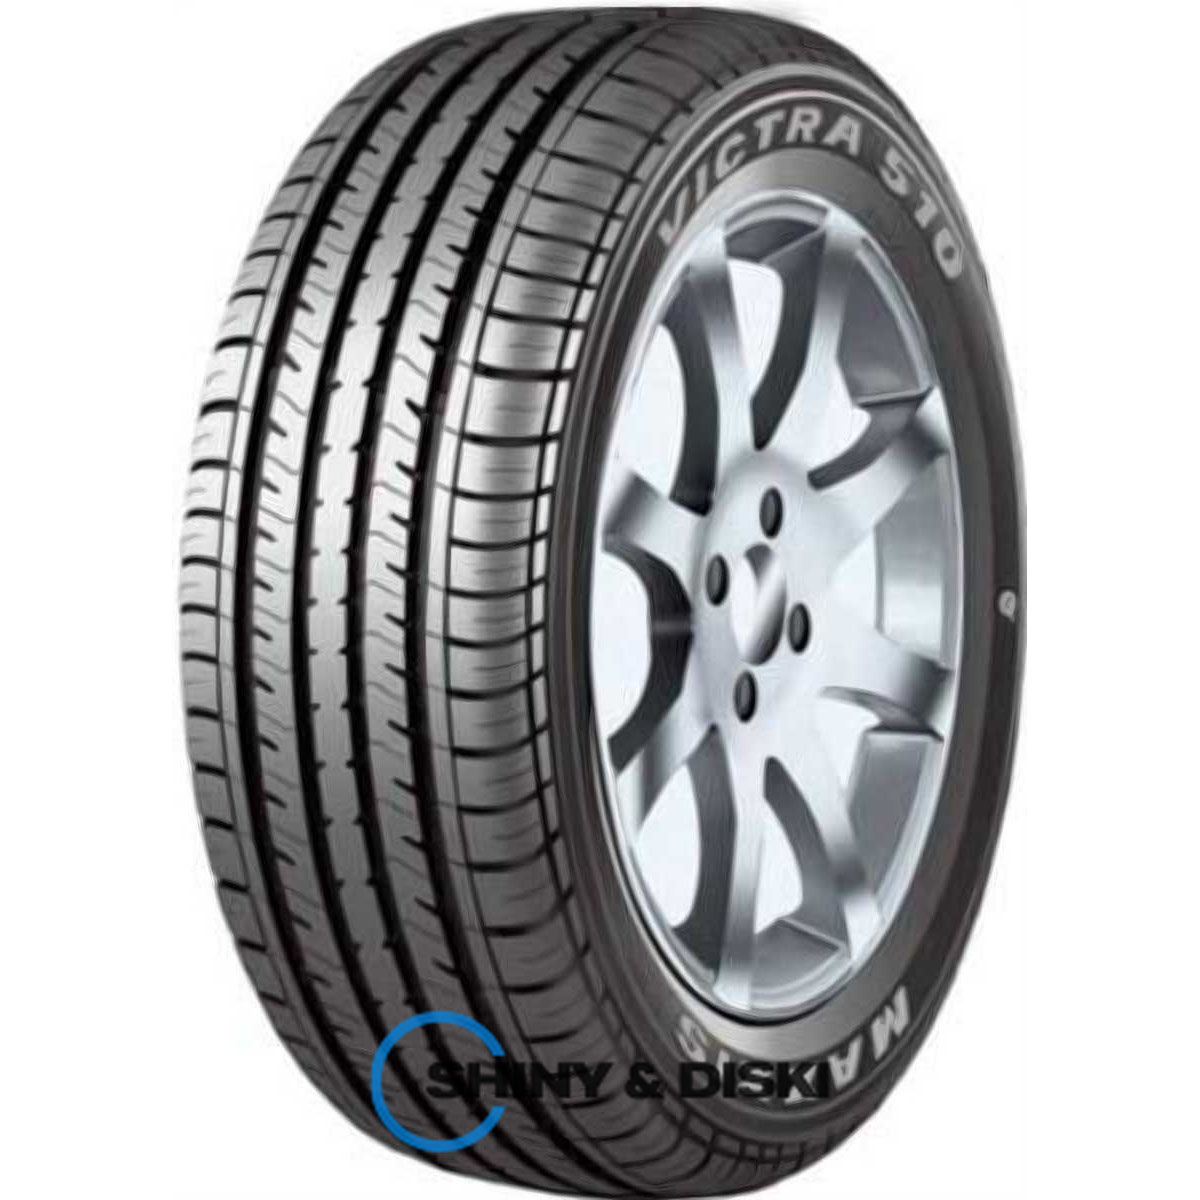 maxxis ma-510 victra 175/70 r14 84t